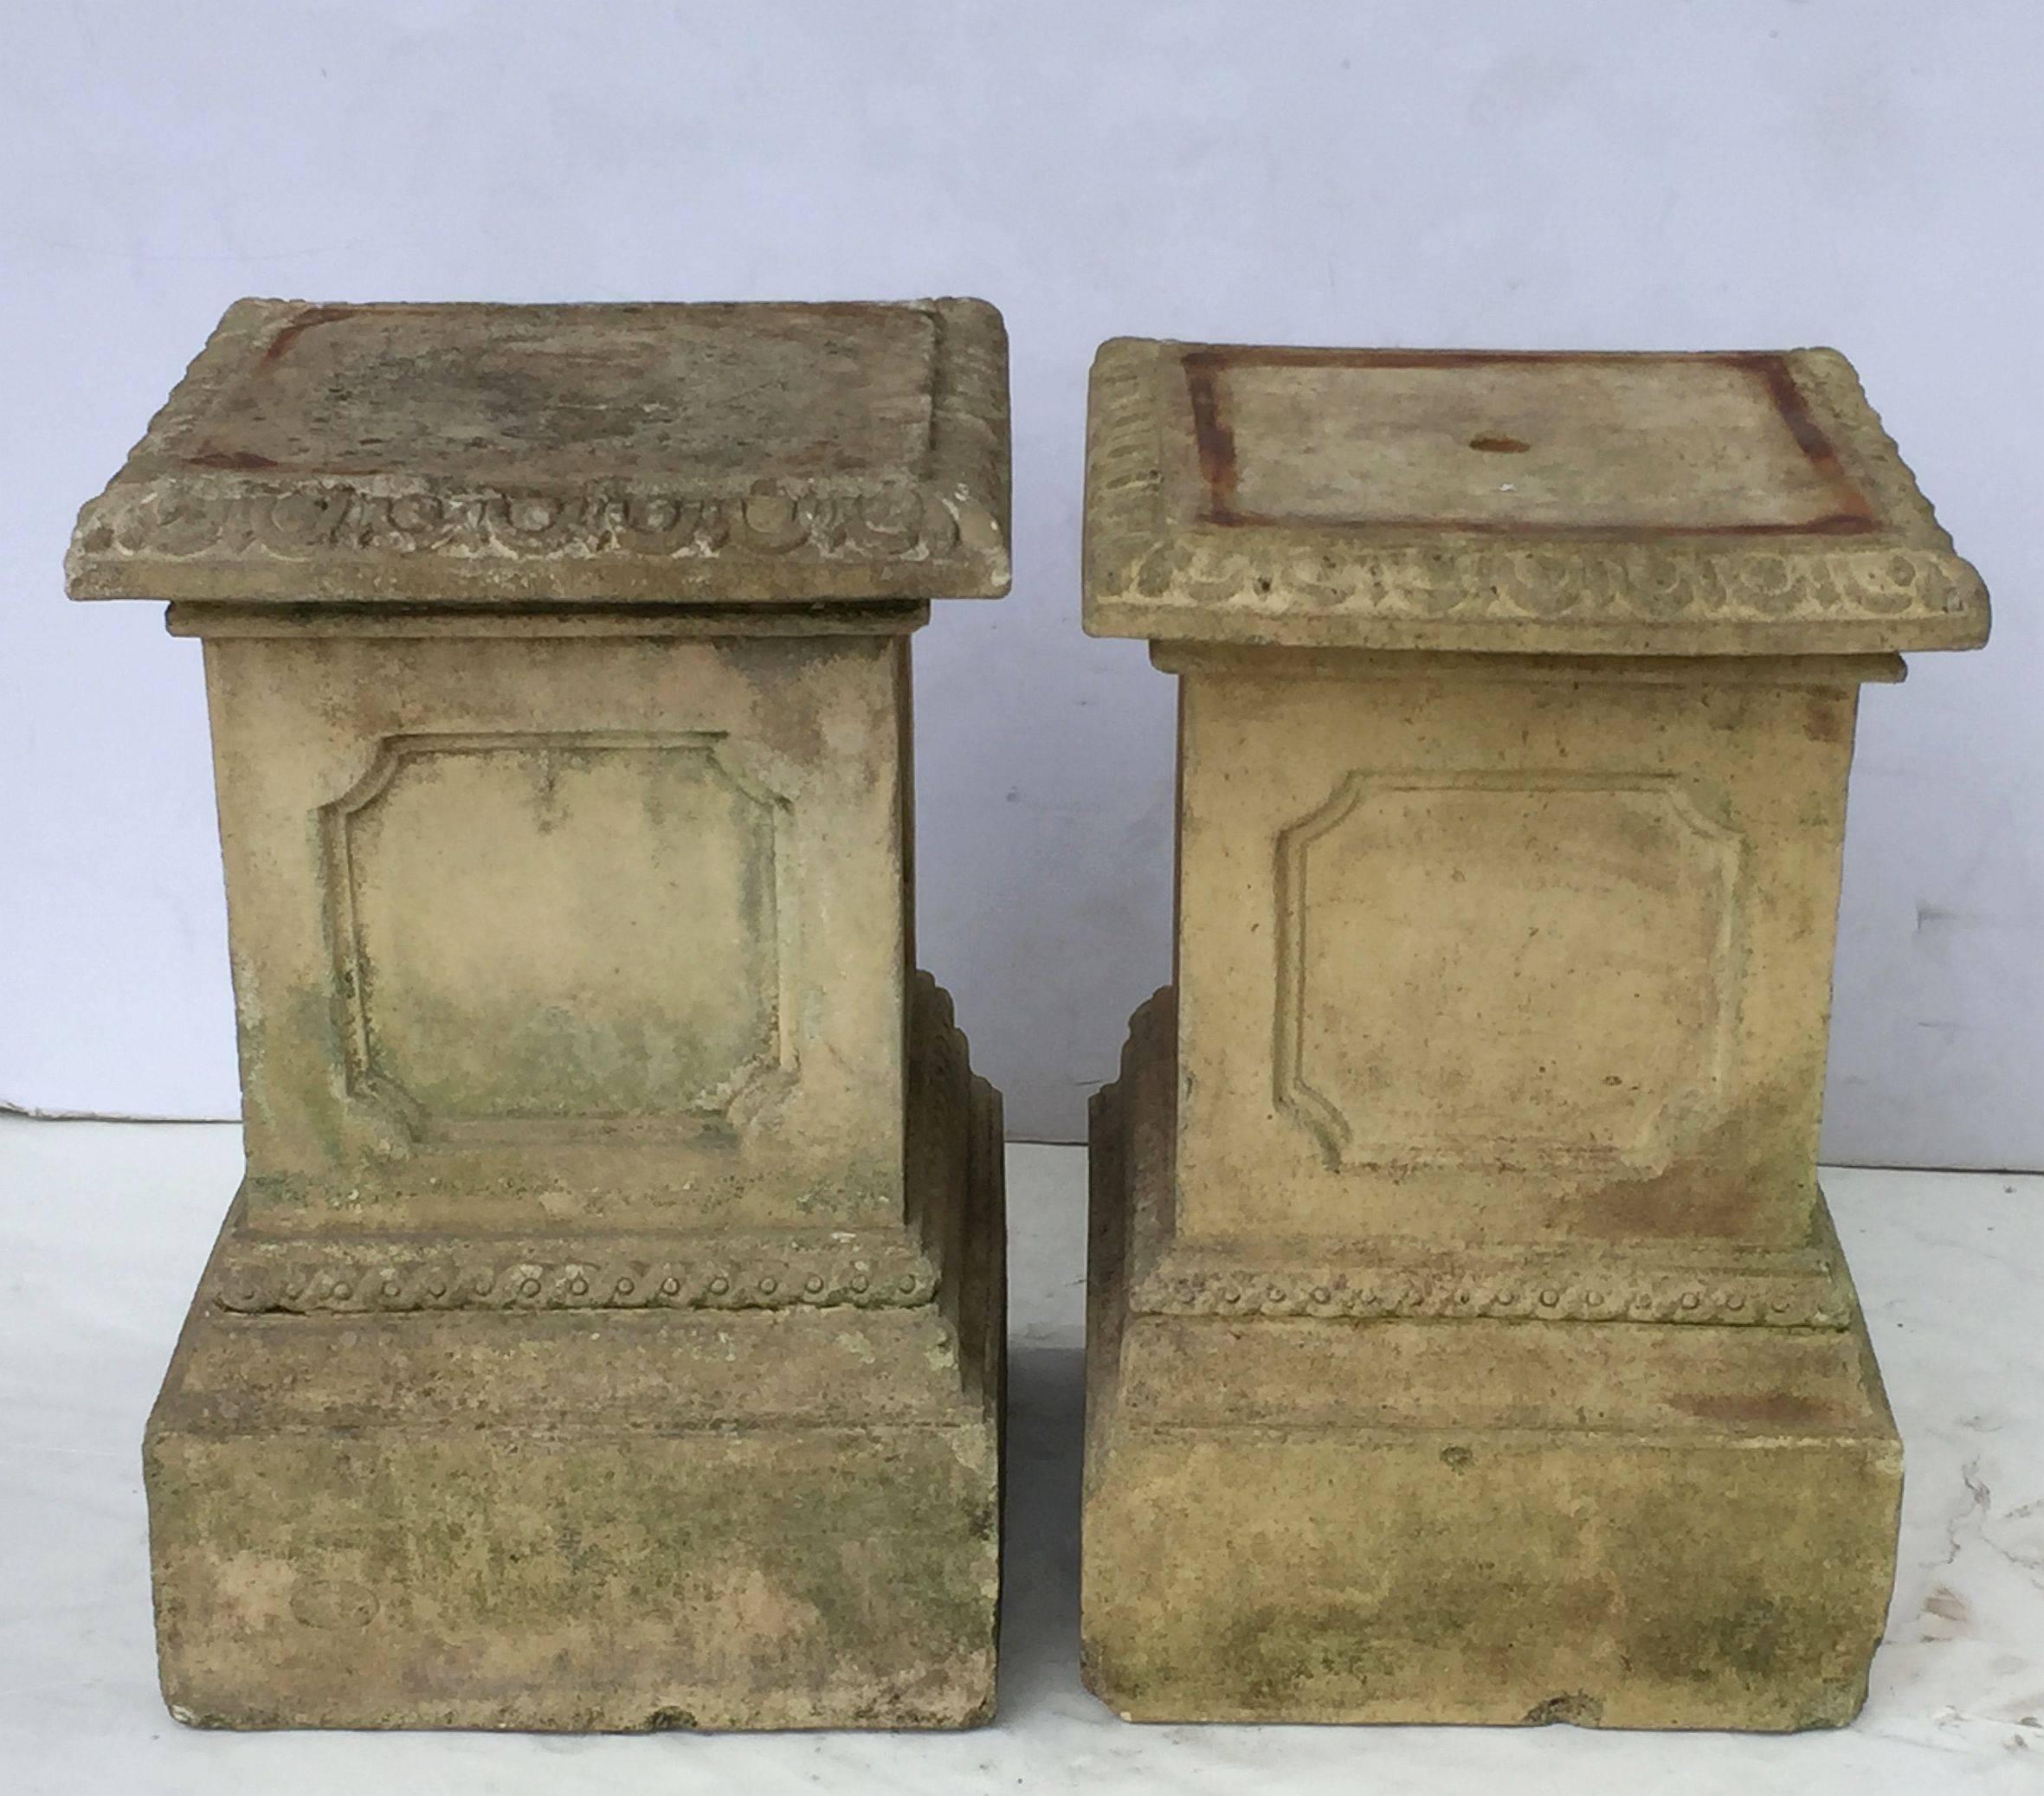 A fine pair of 19th century English garden pedestal plinths of terracotta earthenware, each featuring a design in the Classical style, with egg-and-dart edge on top, four inset panels and raised base.

H 19 1/2